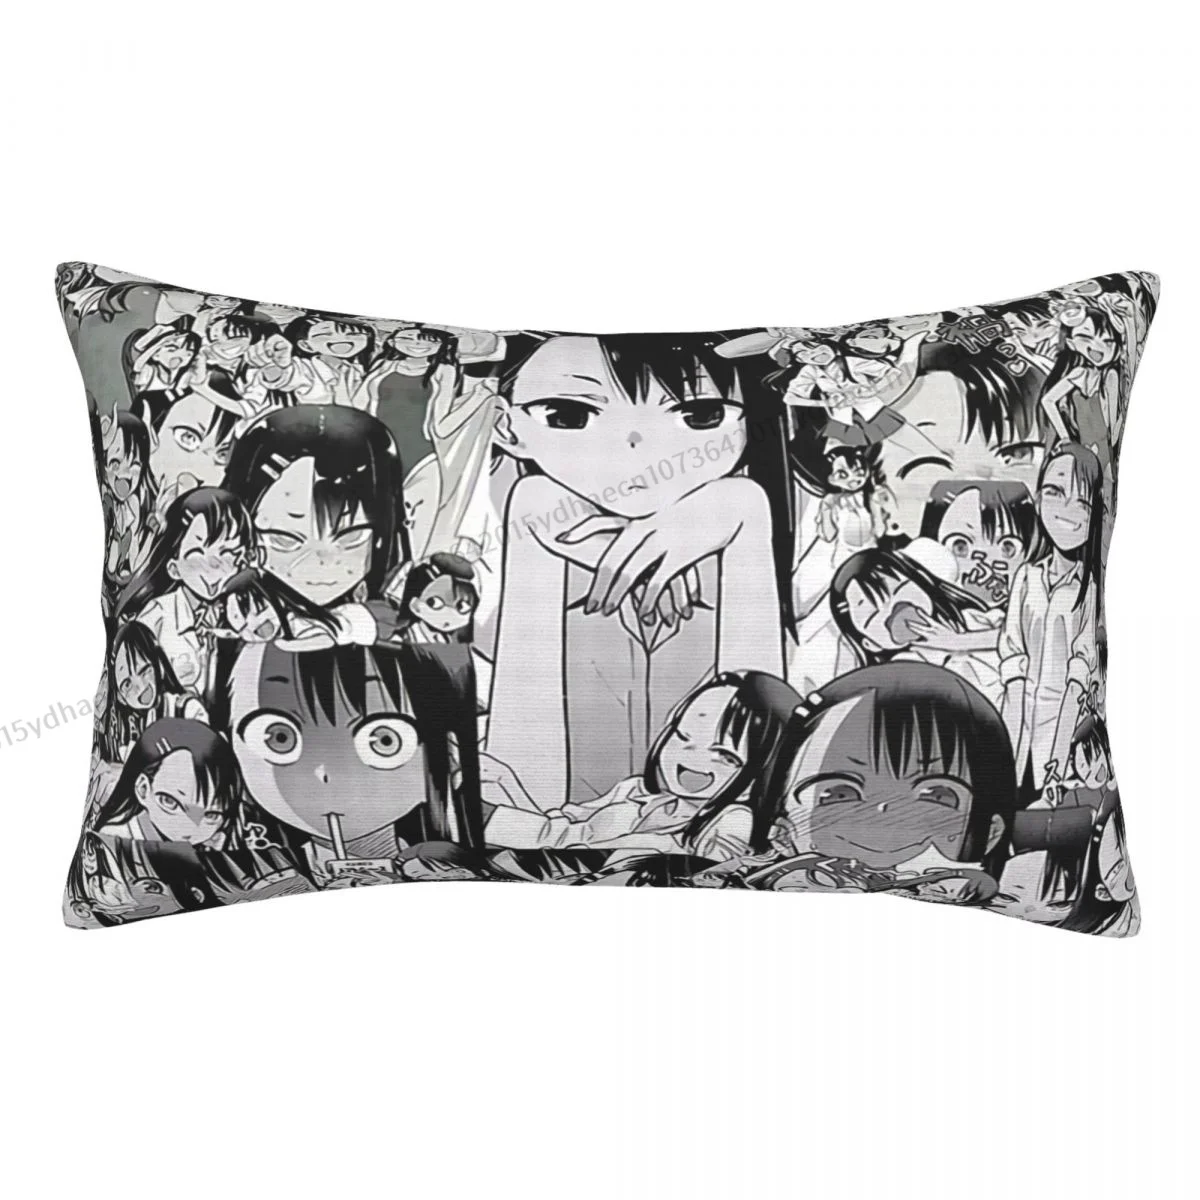 

Girl Collage Cojines Pillowcase Don't toy with me miss Nagatoro Cushion Home Sofa Chair Print Decorative Coussin Pillow Covers